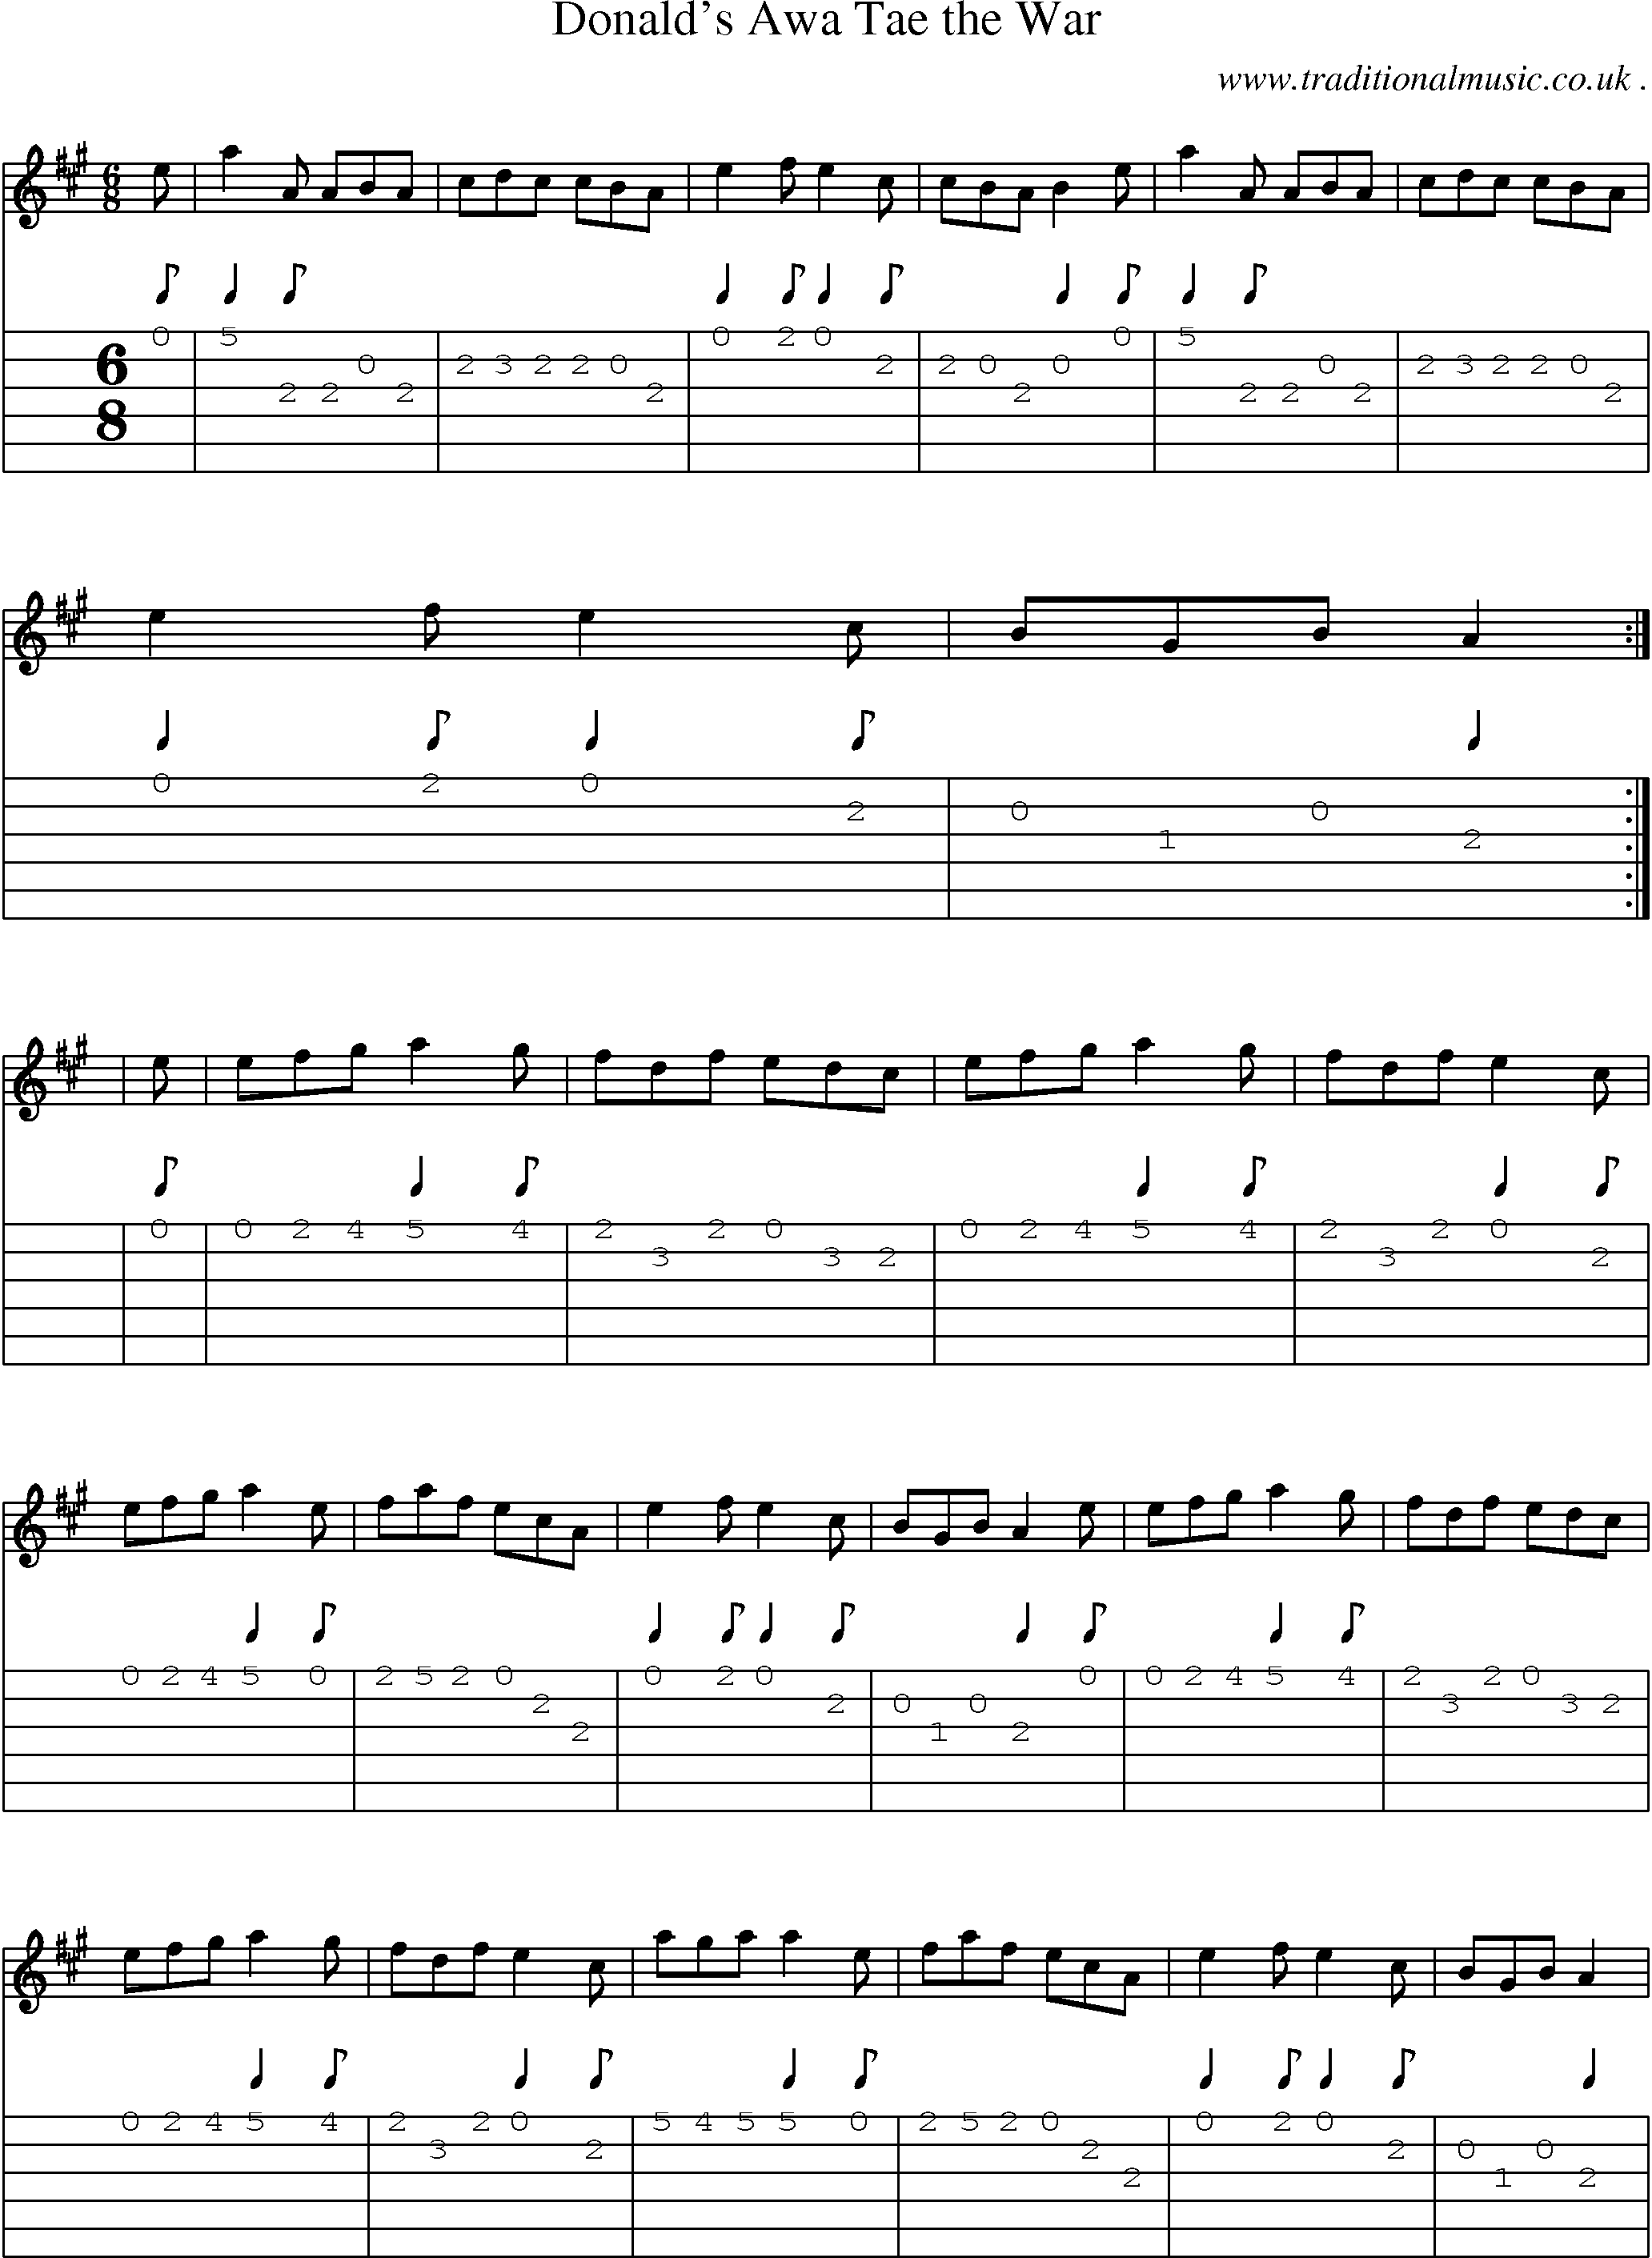 Sheet-music  score, Chords and Guitar Tabs for Donalds Awa Tae The War